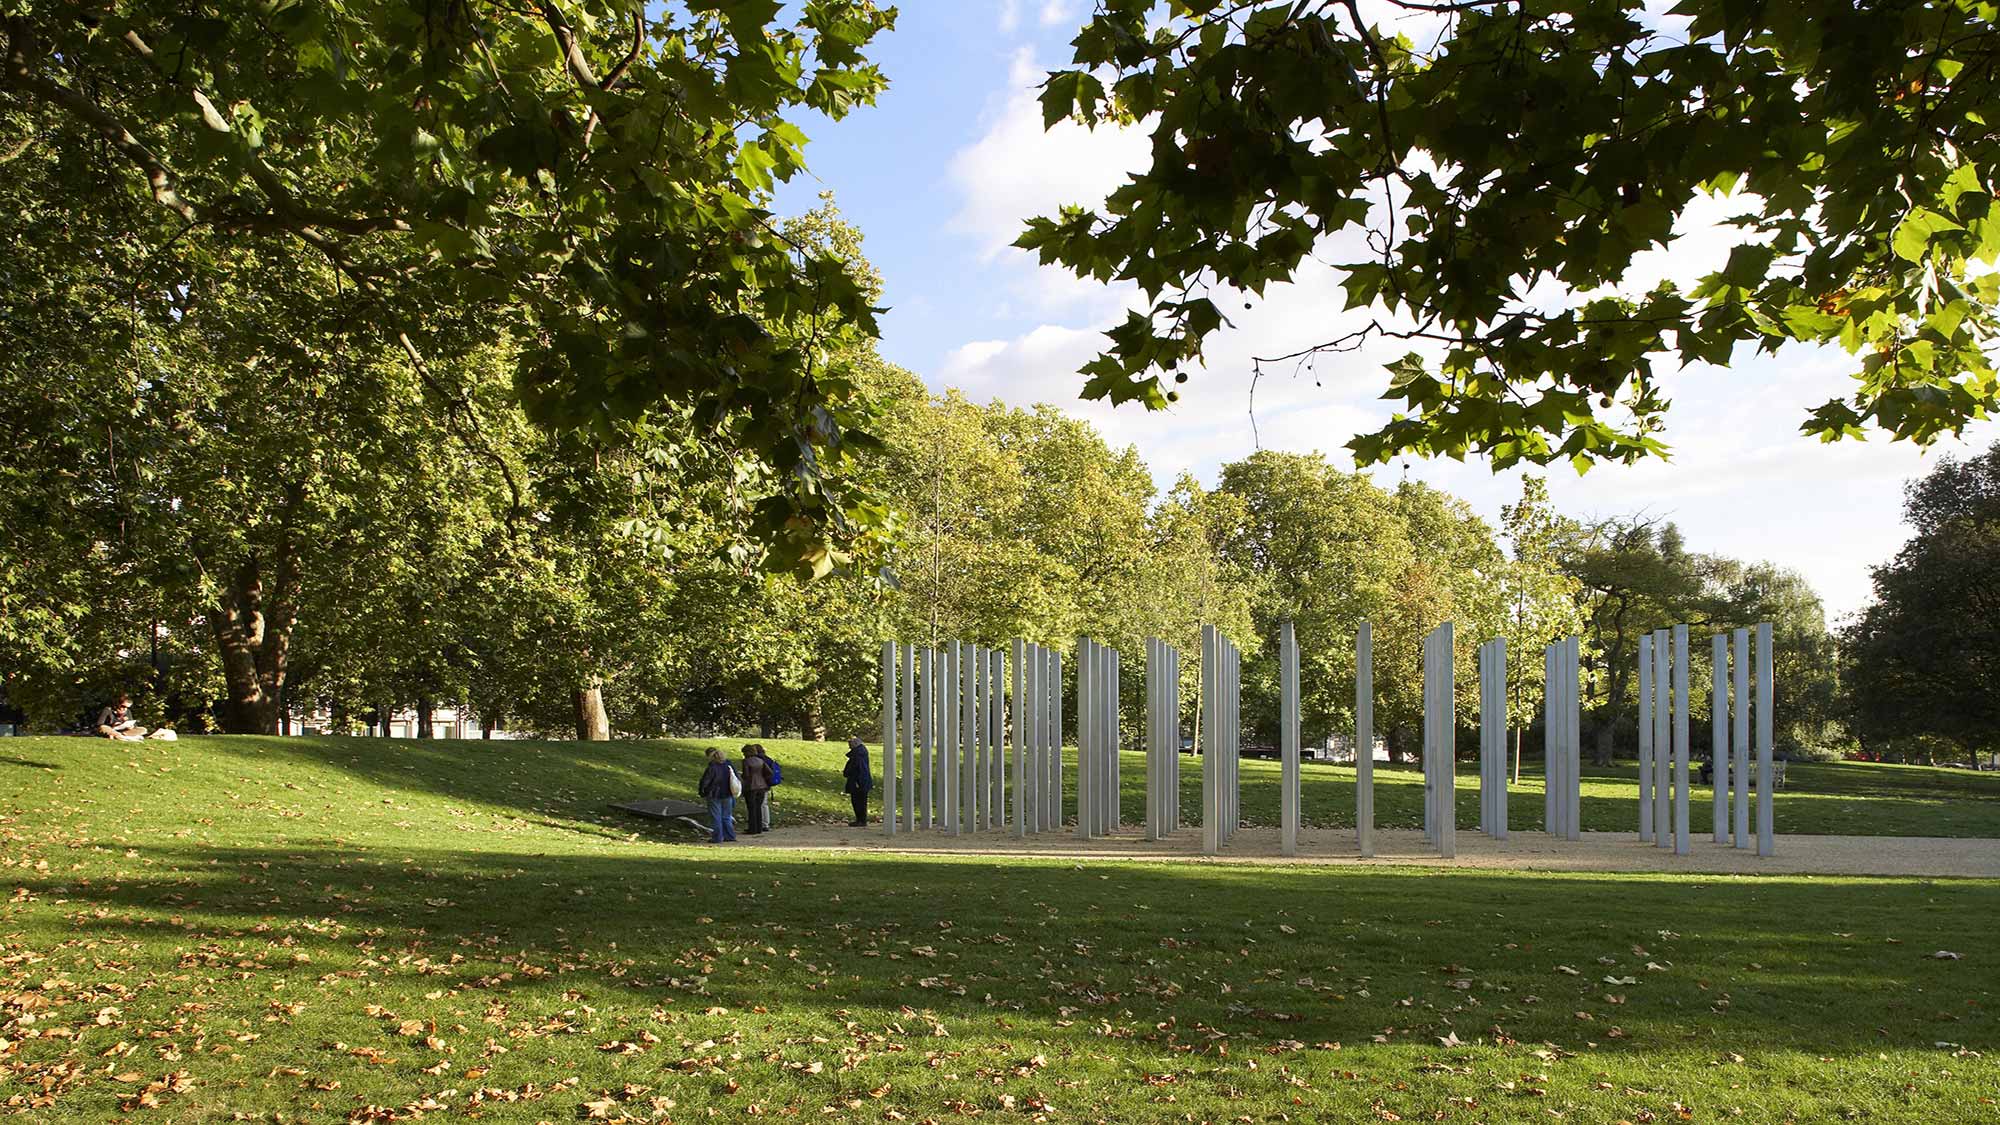 The work is a permanent memorial to honour the 52 lives lost in the four terrorist bombings in London on 7 July 2005.